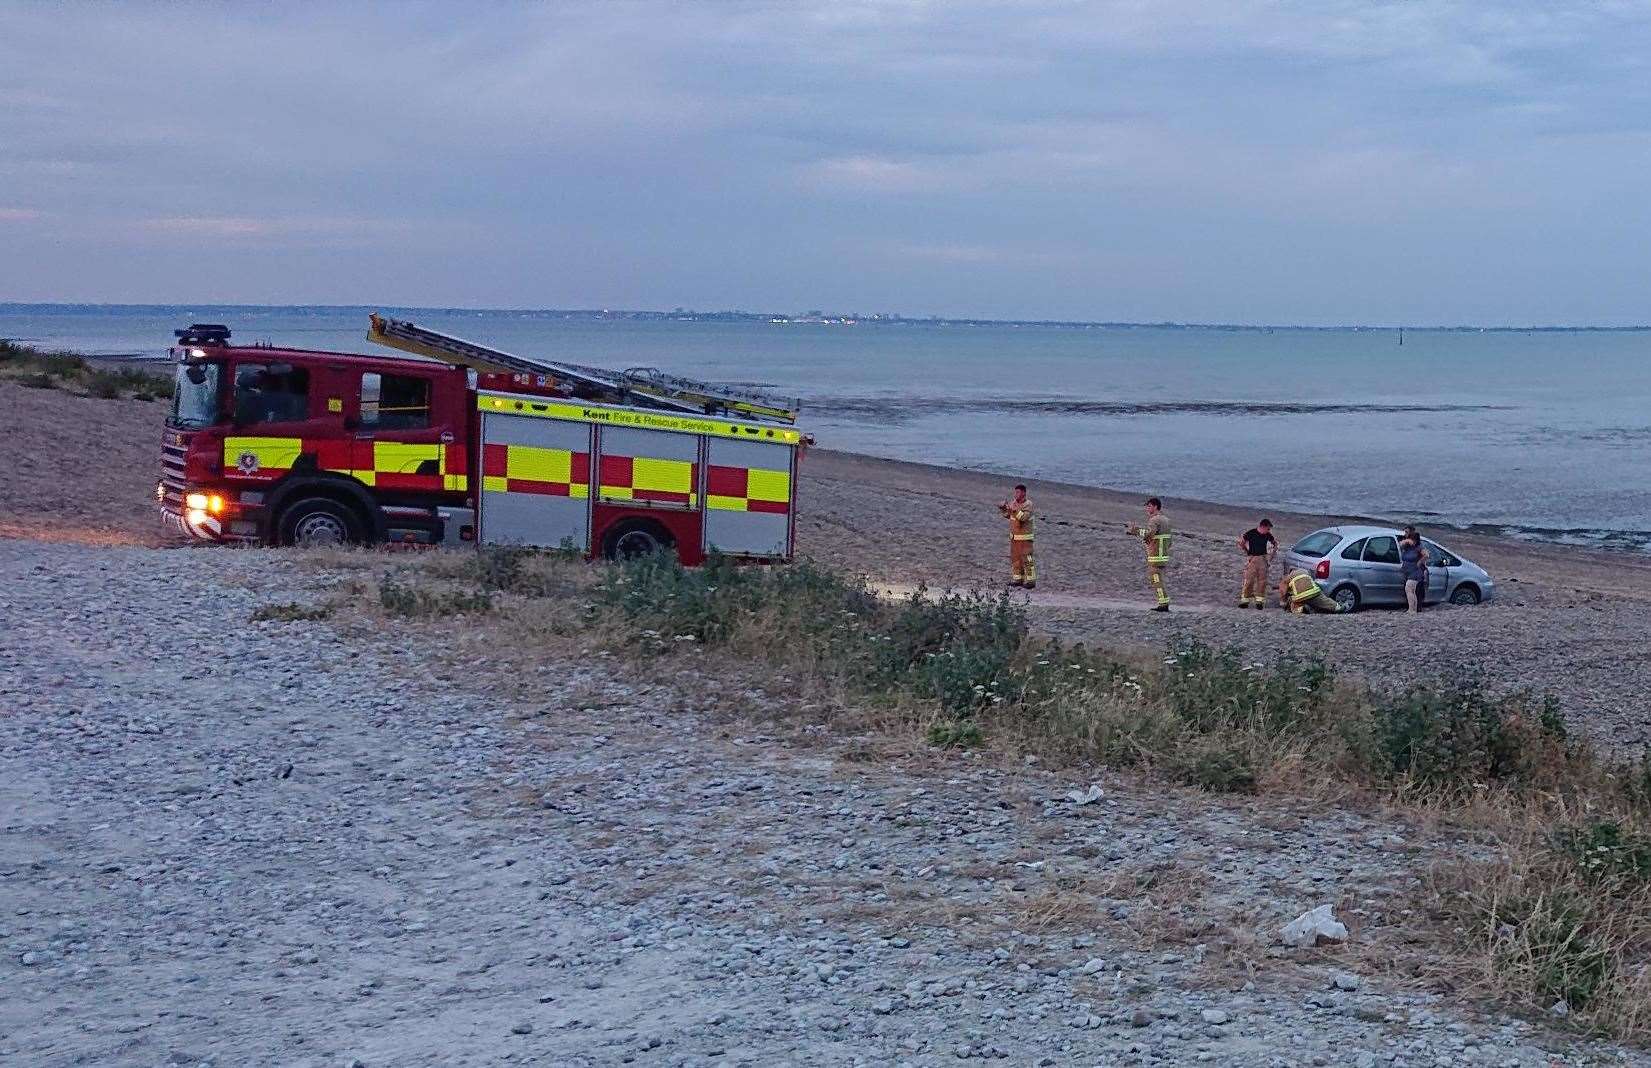 Emergency crews were called in to help the trapped driver and passengers. Picture: Stuart H